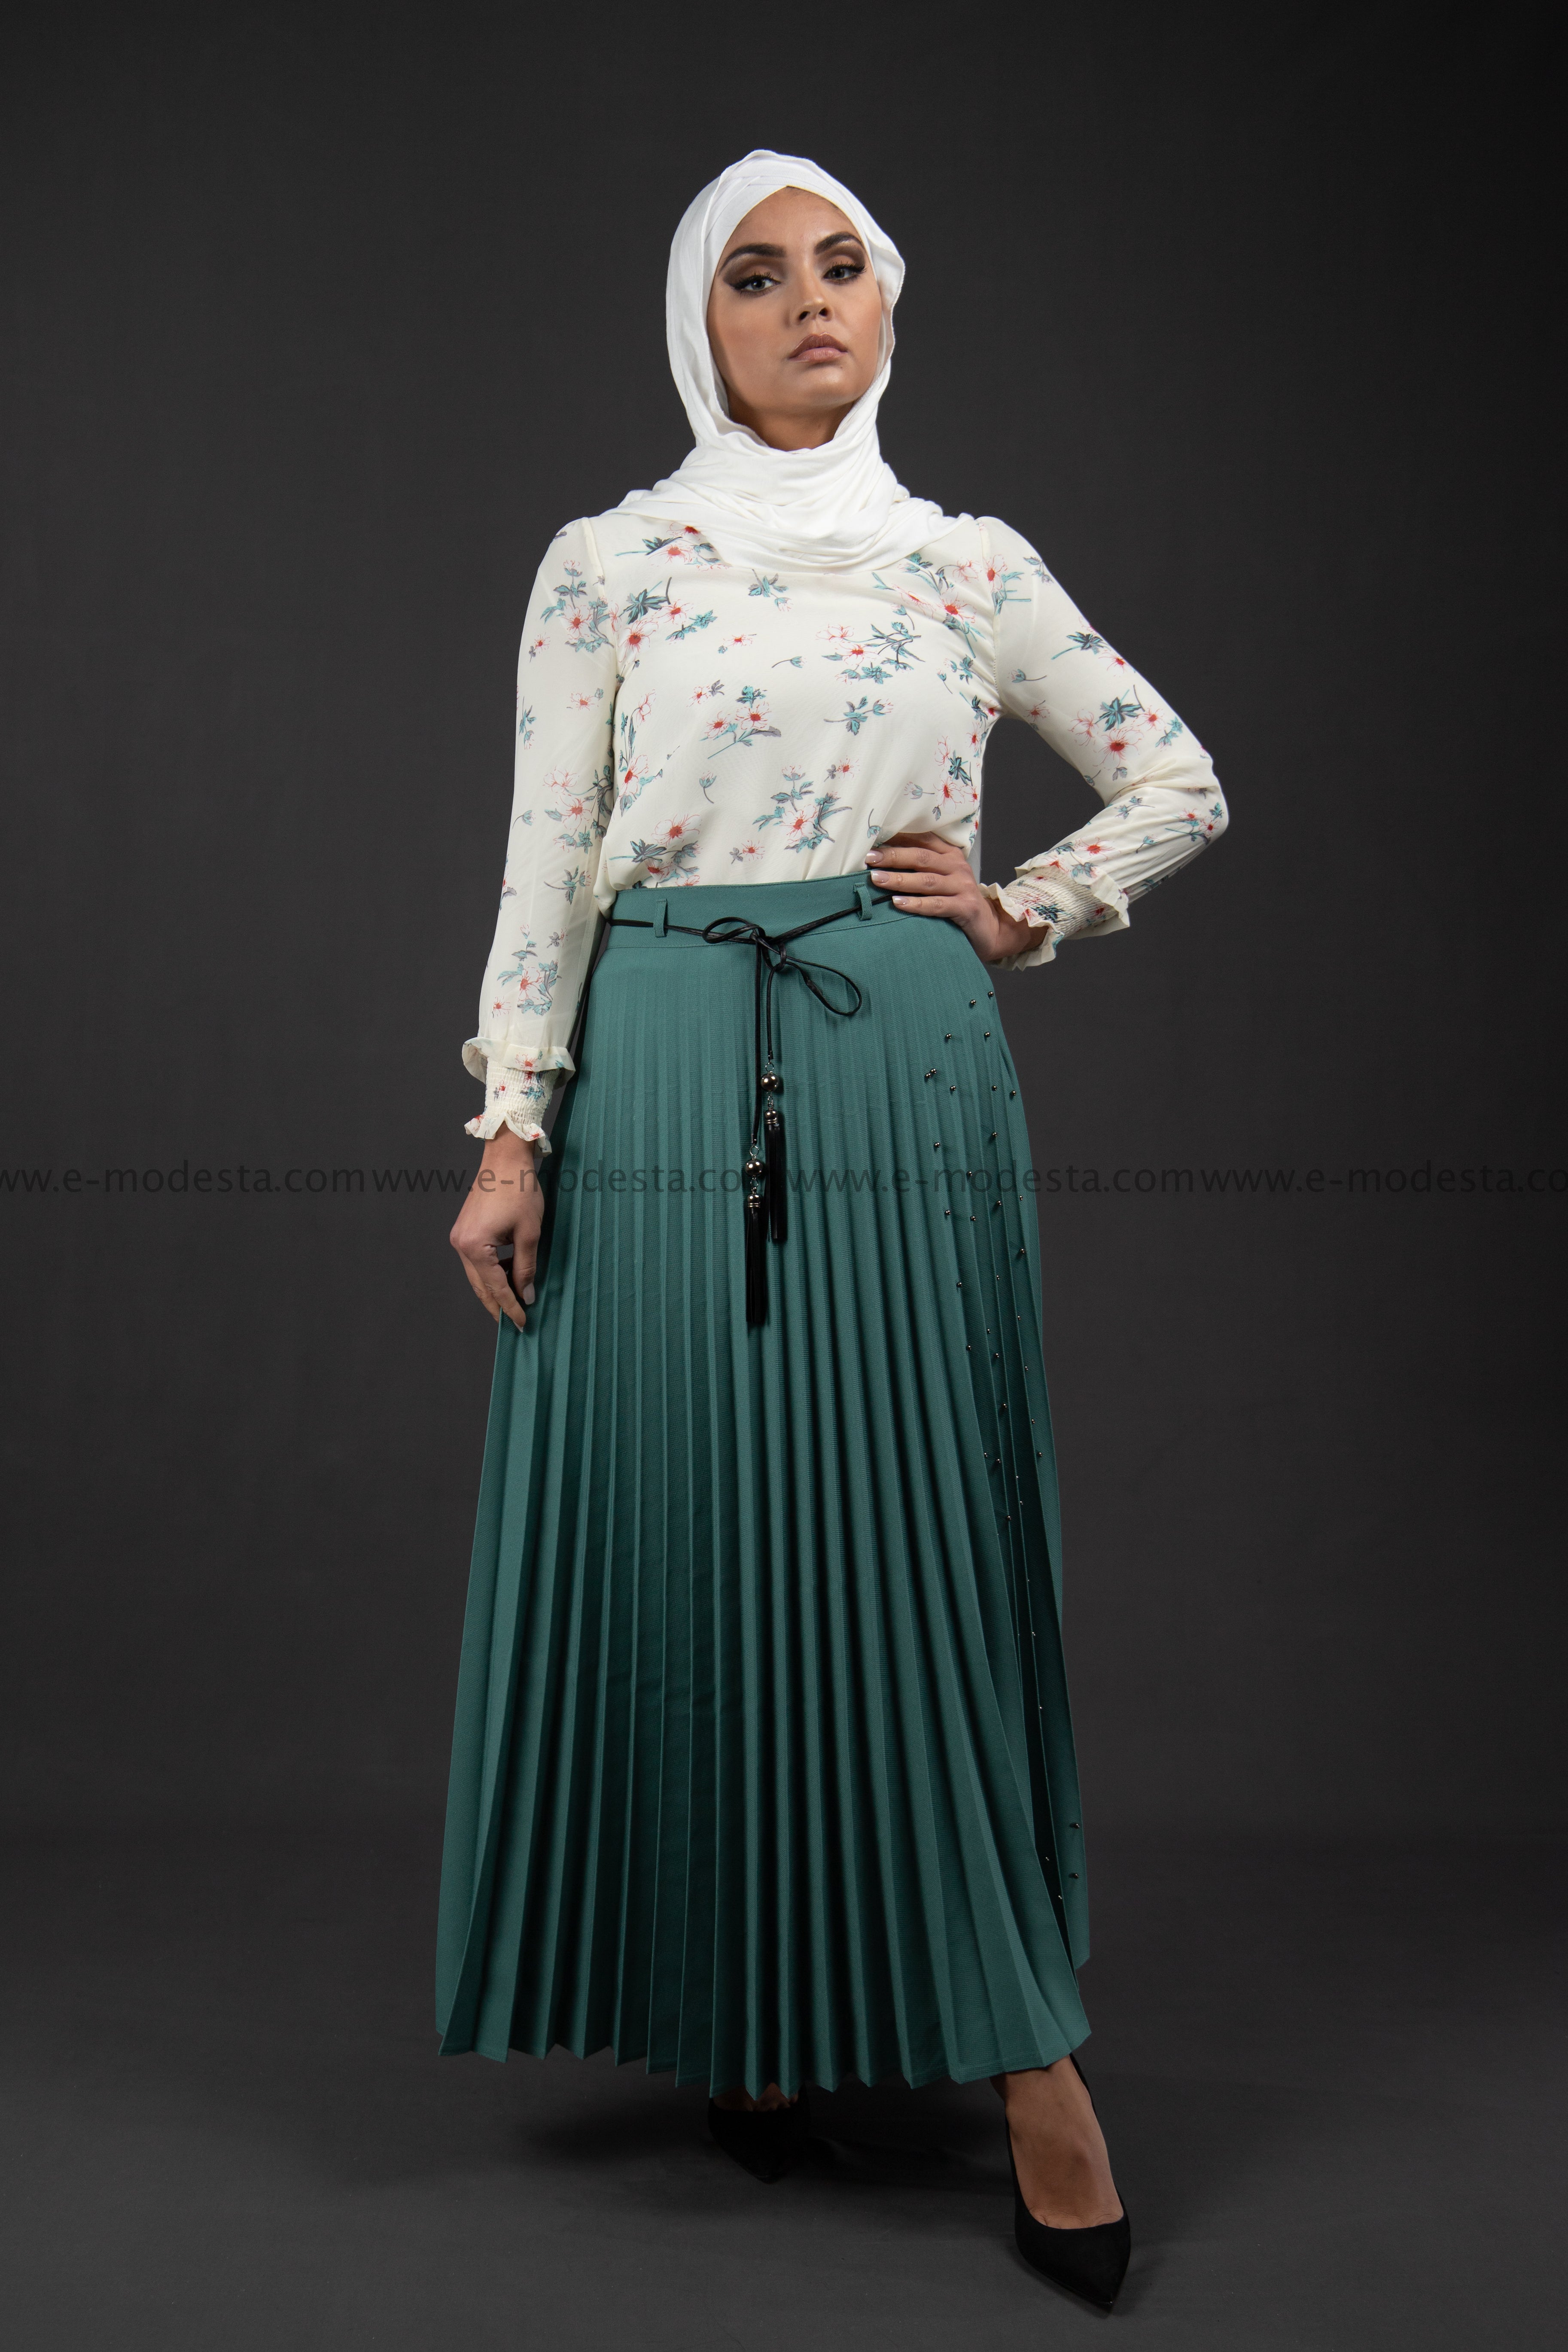 Pleated Maxi Skirt | Teal Blue Color | Pearls on One Side - E-Modesta